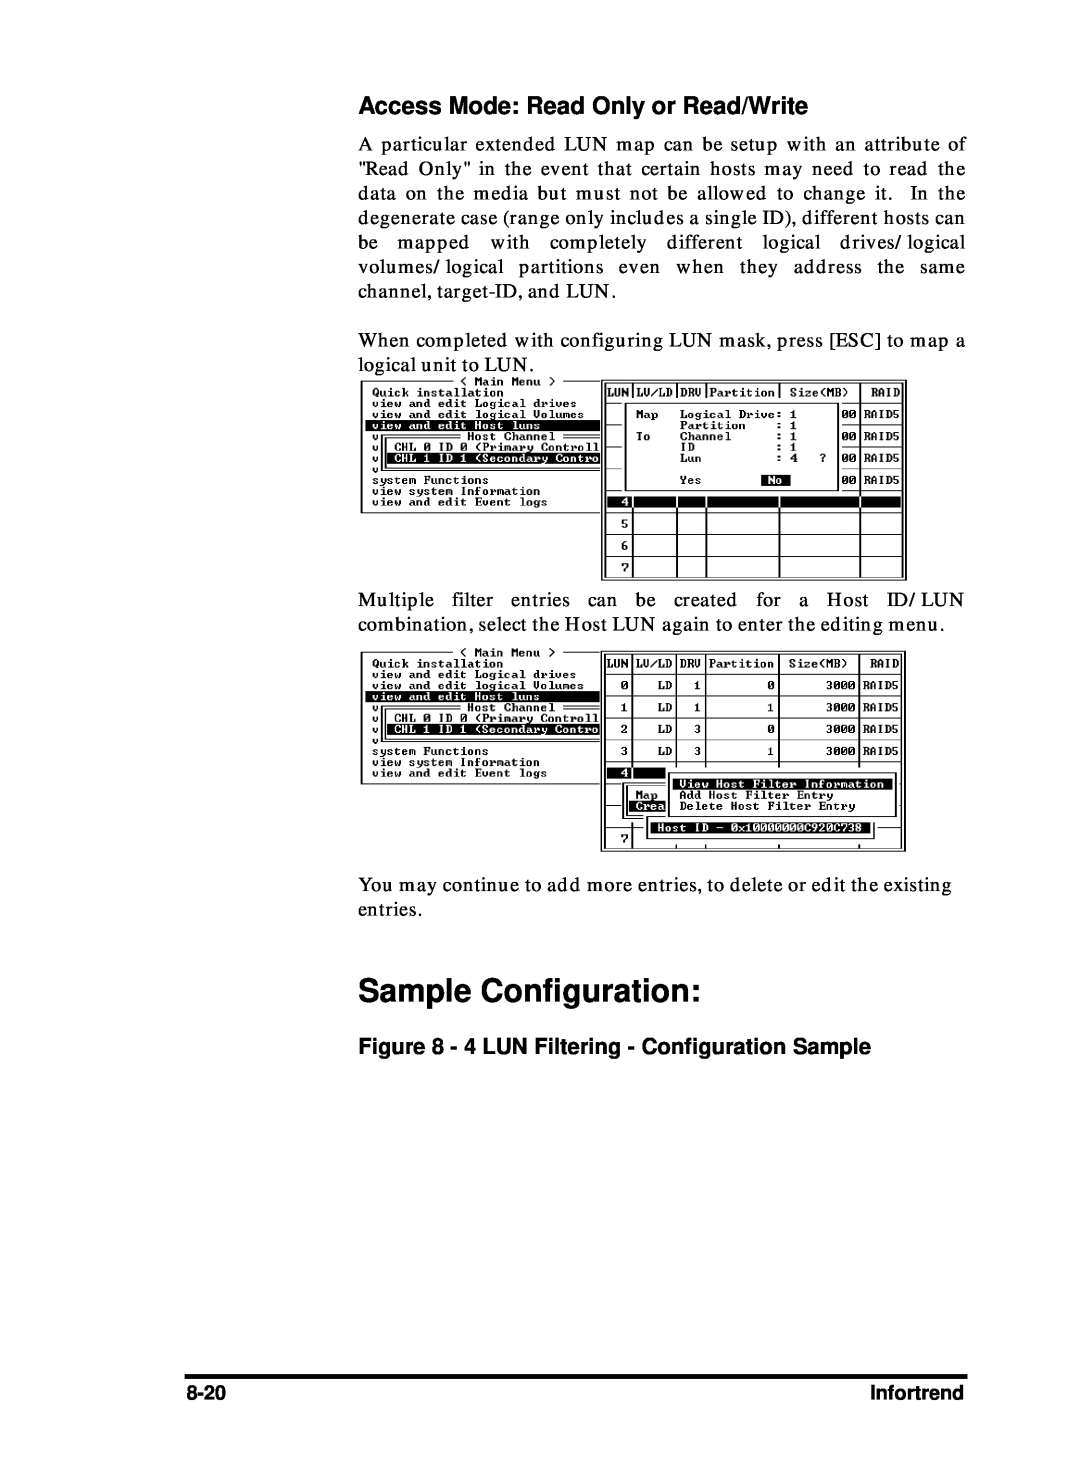 Compaq Infortrend manual Sample Configuration, Access Mode Read Only or Read/Write, 4 LUN Filtering - Configuration Sample 